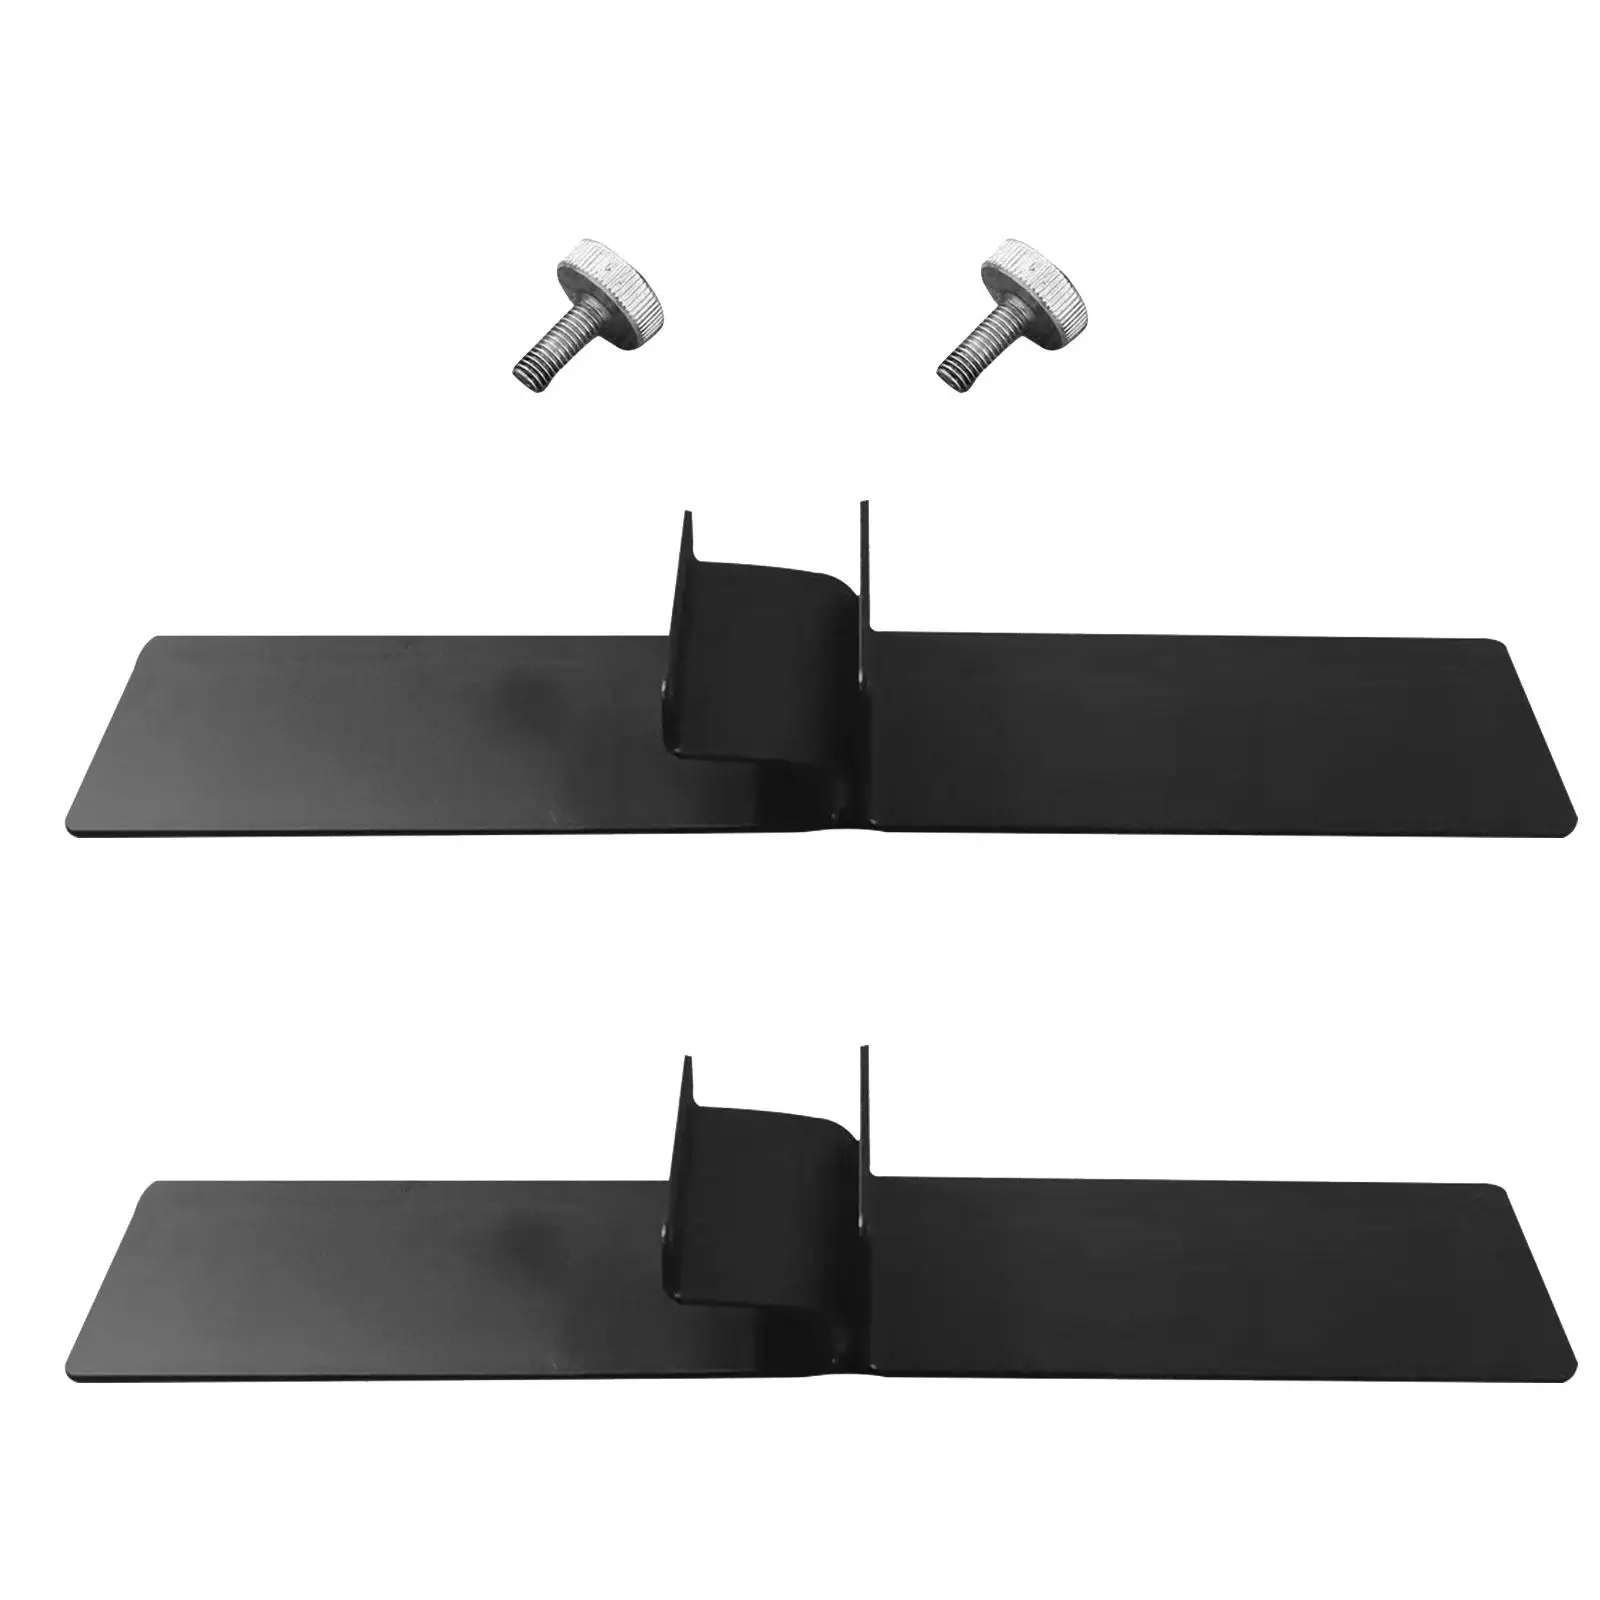 1 Pair Feet for Infrared Heater Office Support Bracket Portable Durable Hotel for Free Standing Use of Electric Heaters